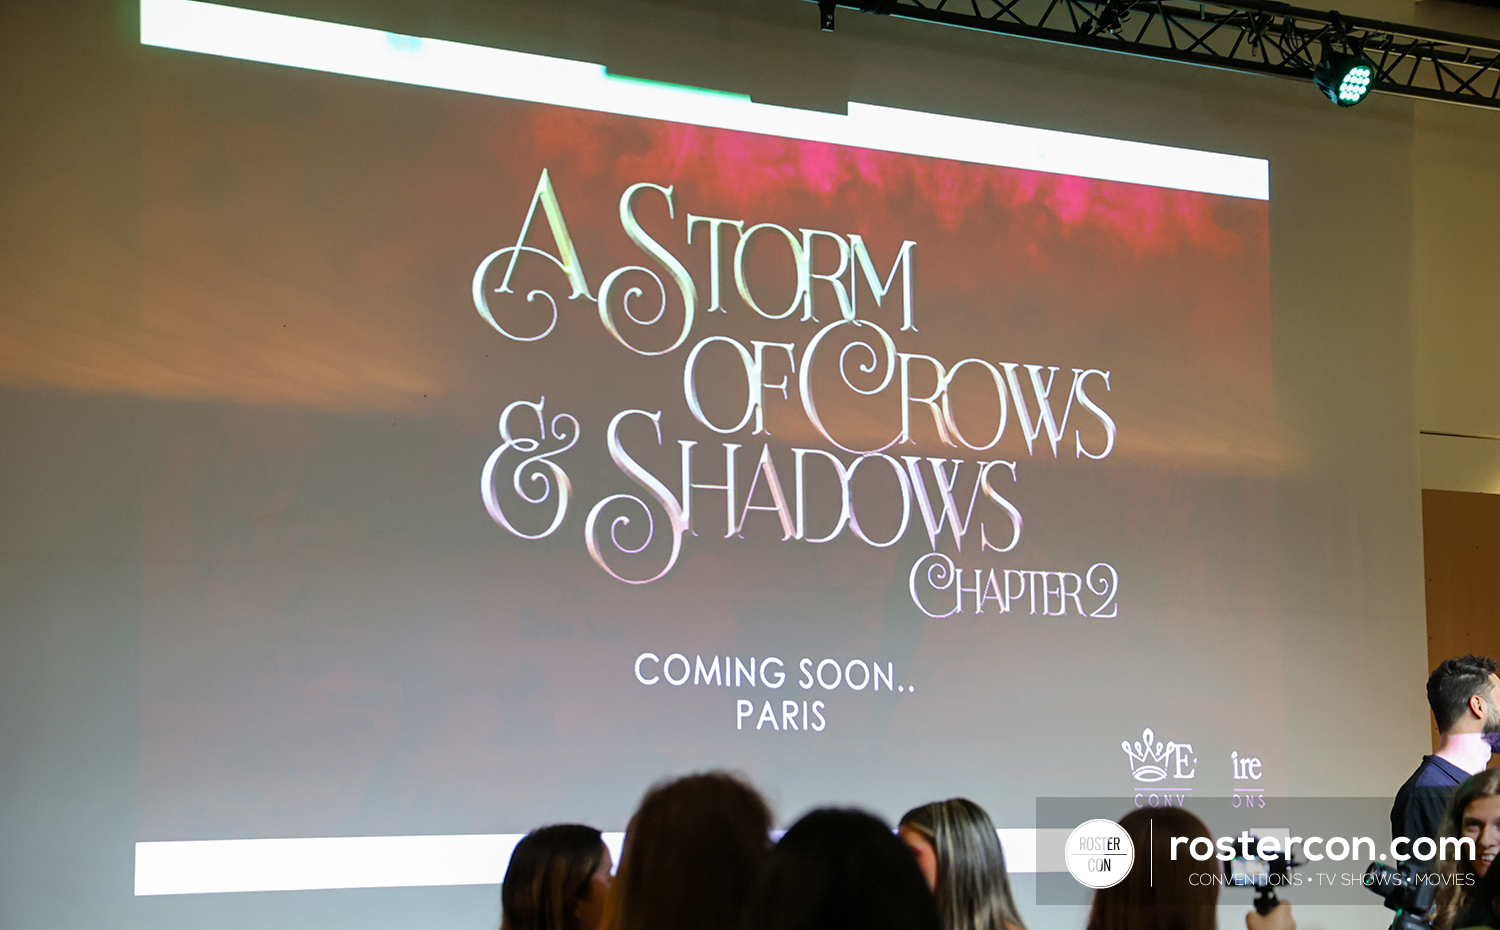 Shadow and Bone - A Storm of Crows and Shadows